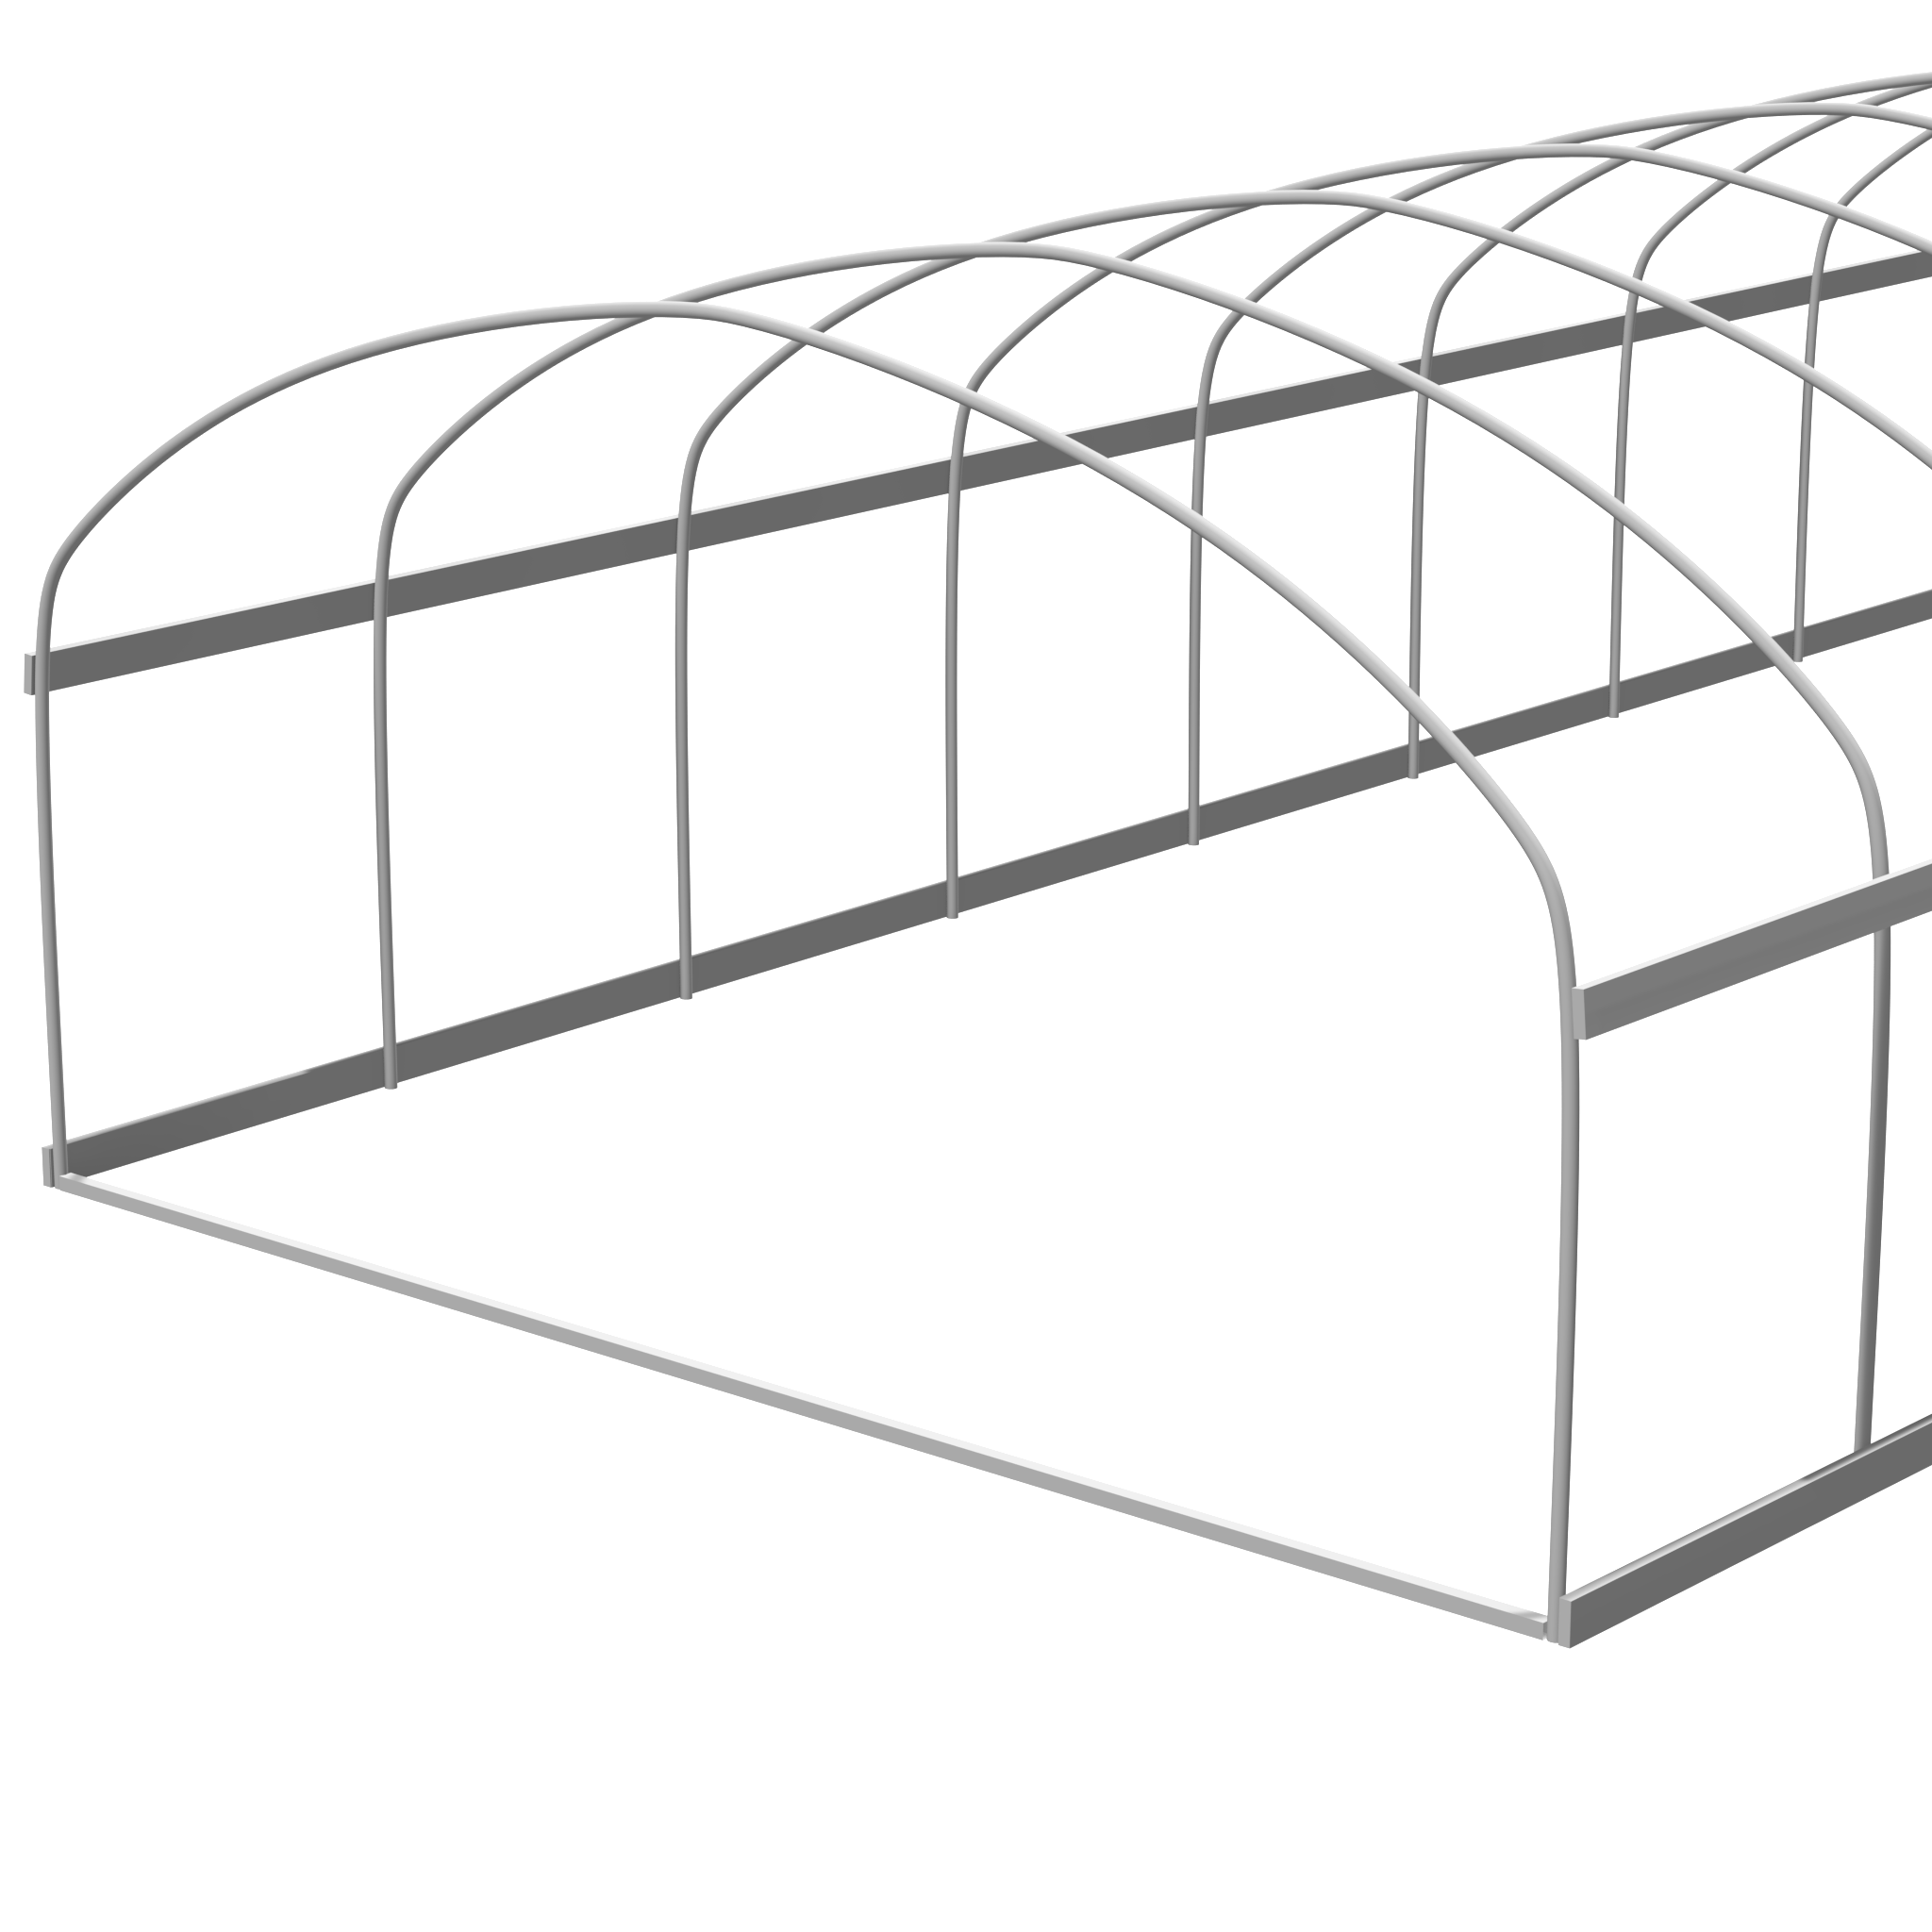 20'x30' Greenhouse Frame Quonset